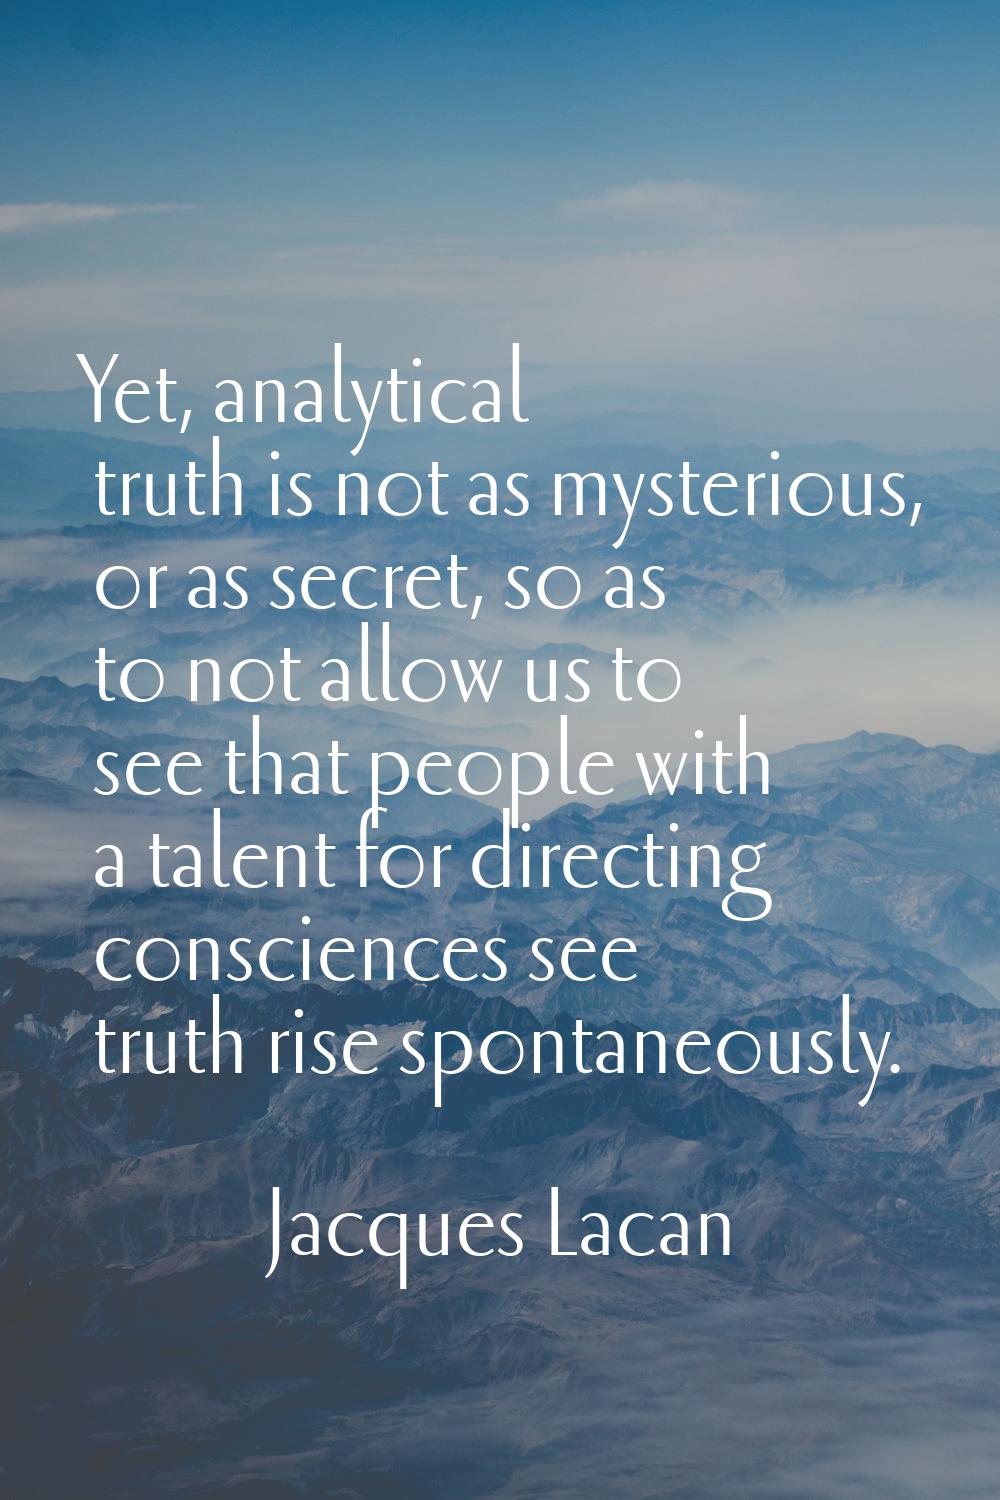 Yet, analytical truth is not as mysterious, or as secret, so as to not allow us to see that people 